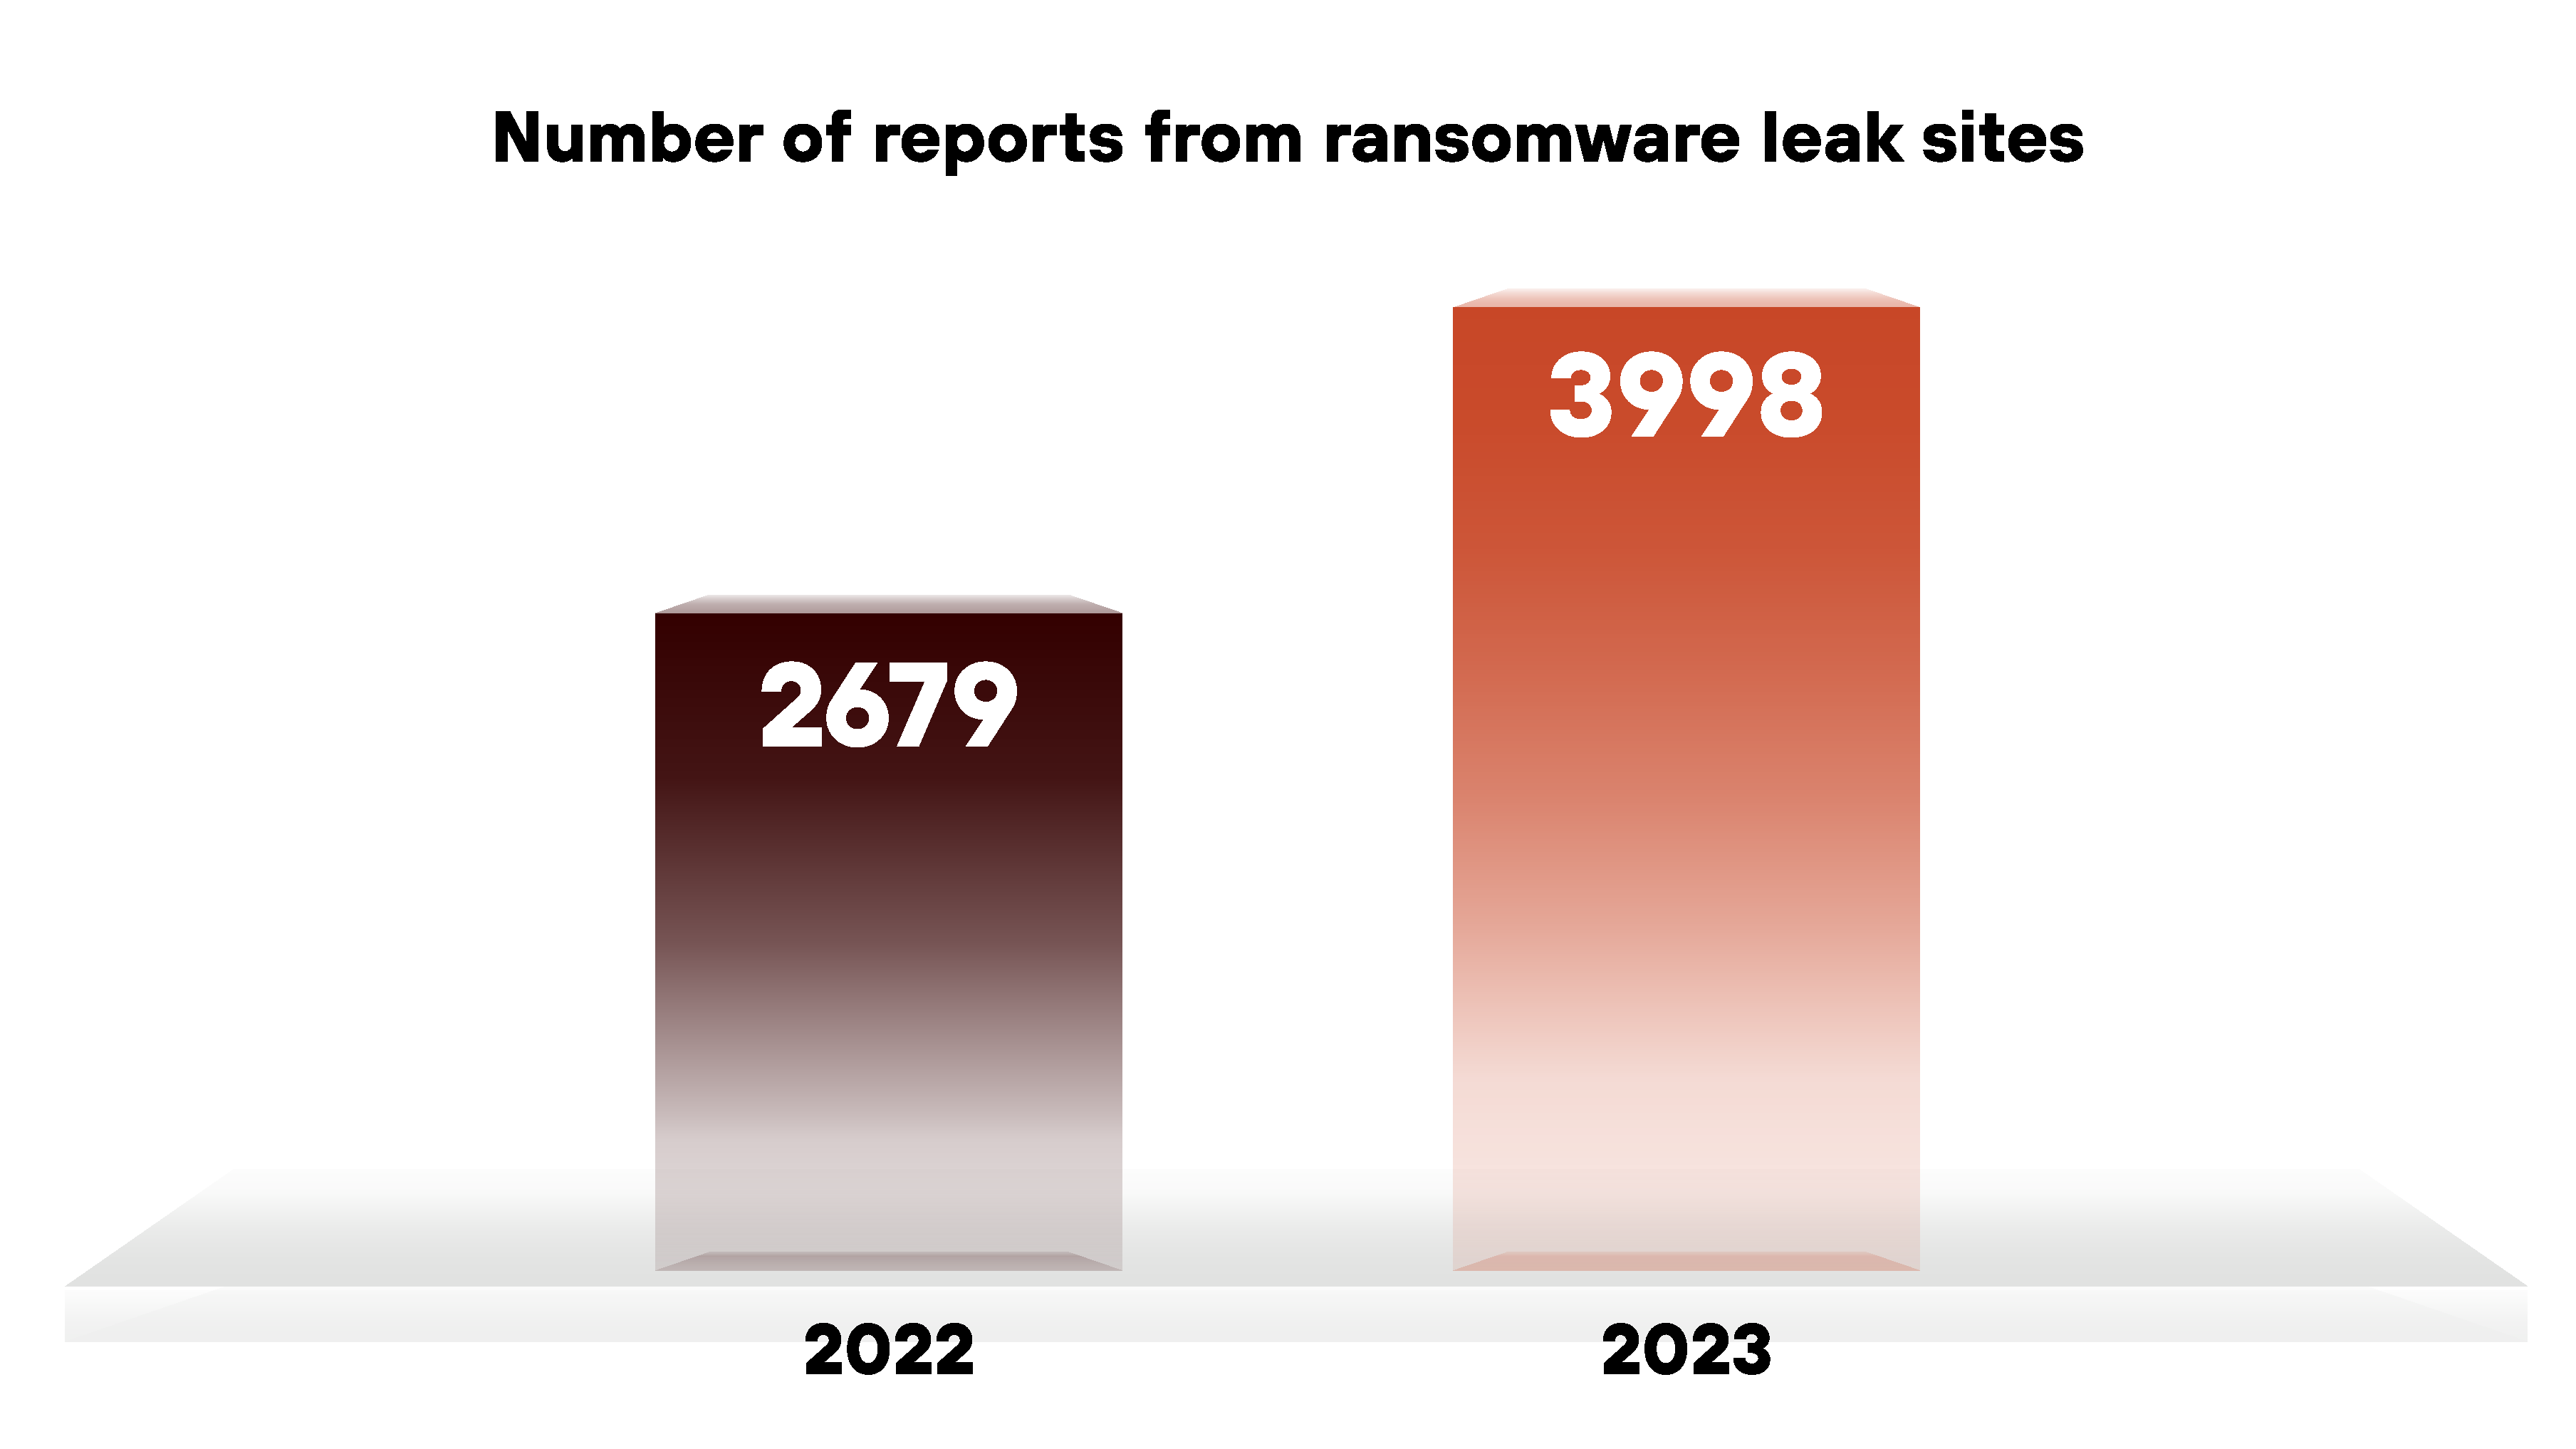 Image 1 is a column graph comparing ransomware leak site reports from 2022 to 2023. There were 2,679 instances in 2022. There were 3,998 in 2023. 